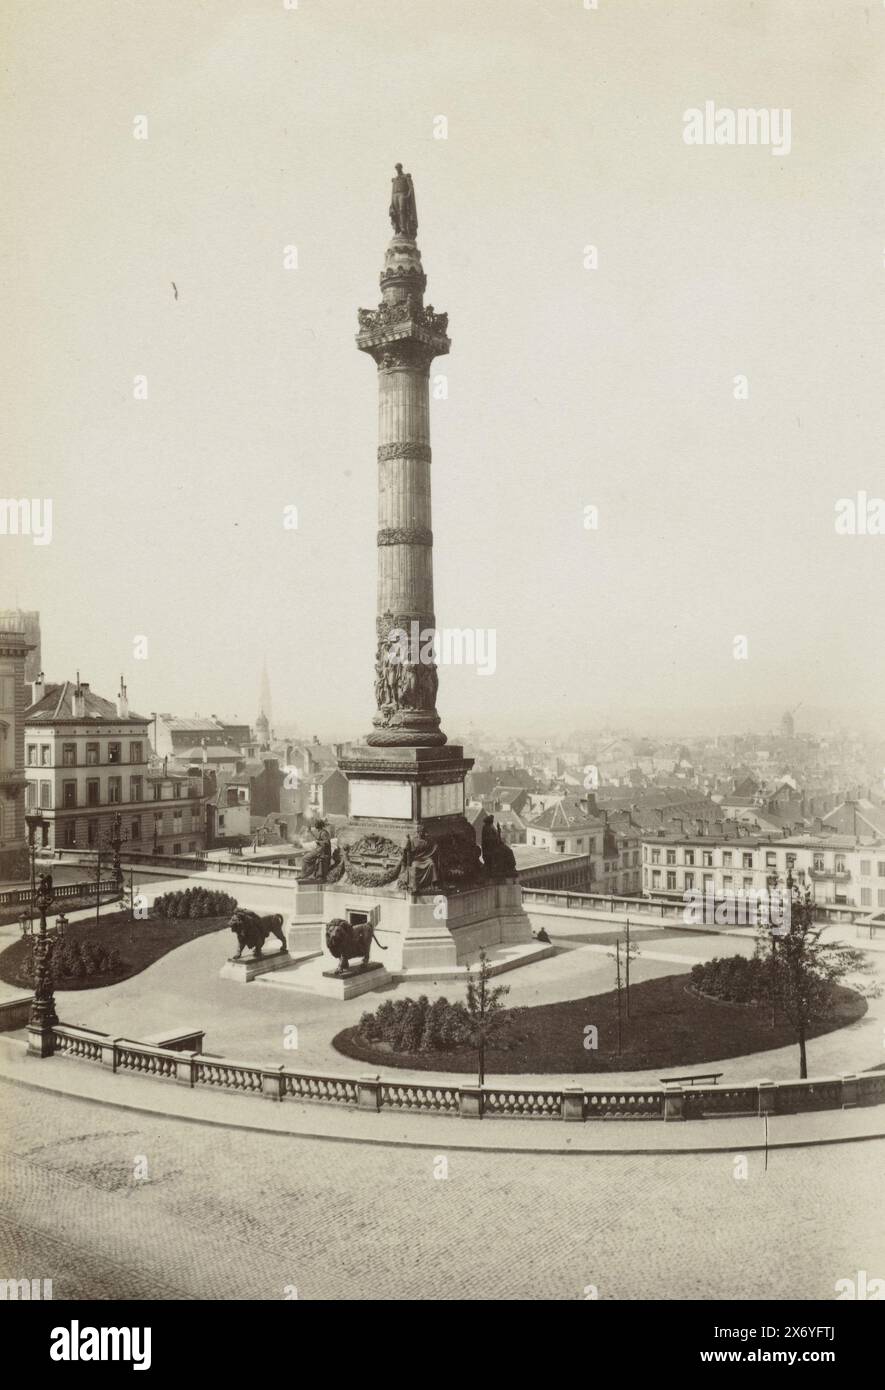 Congress column in Brussels, Bruxelles - Colonne du Congrès (title on object), photograph, Louis Antoine Pamard, (mentioned on object), Brussels, 1860 - 1890, paper, albumen print, height, 182 mm × width, 119 mm Stock Photo